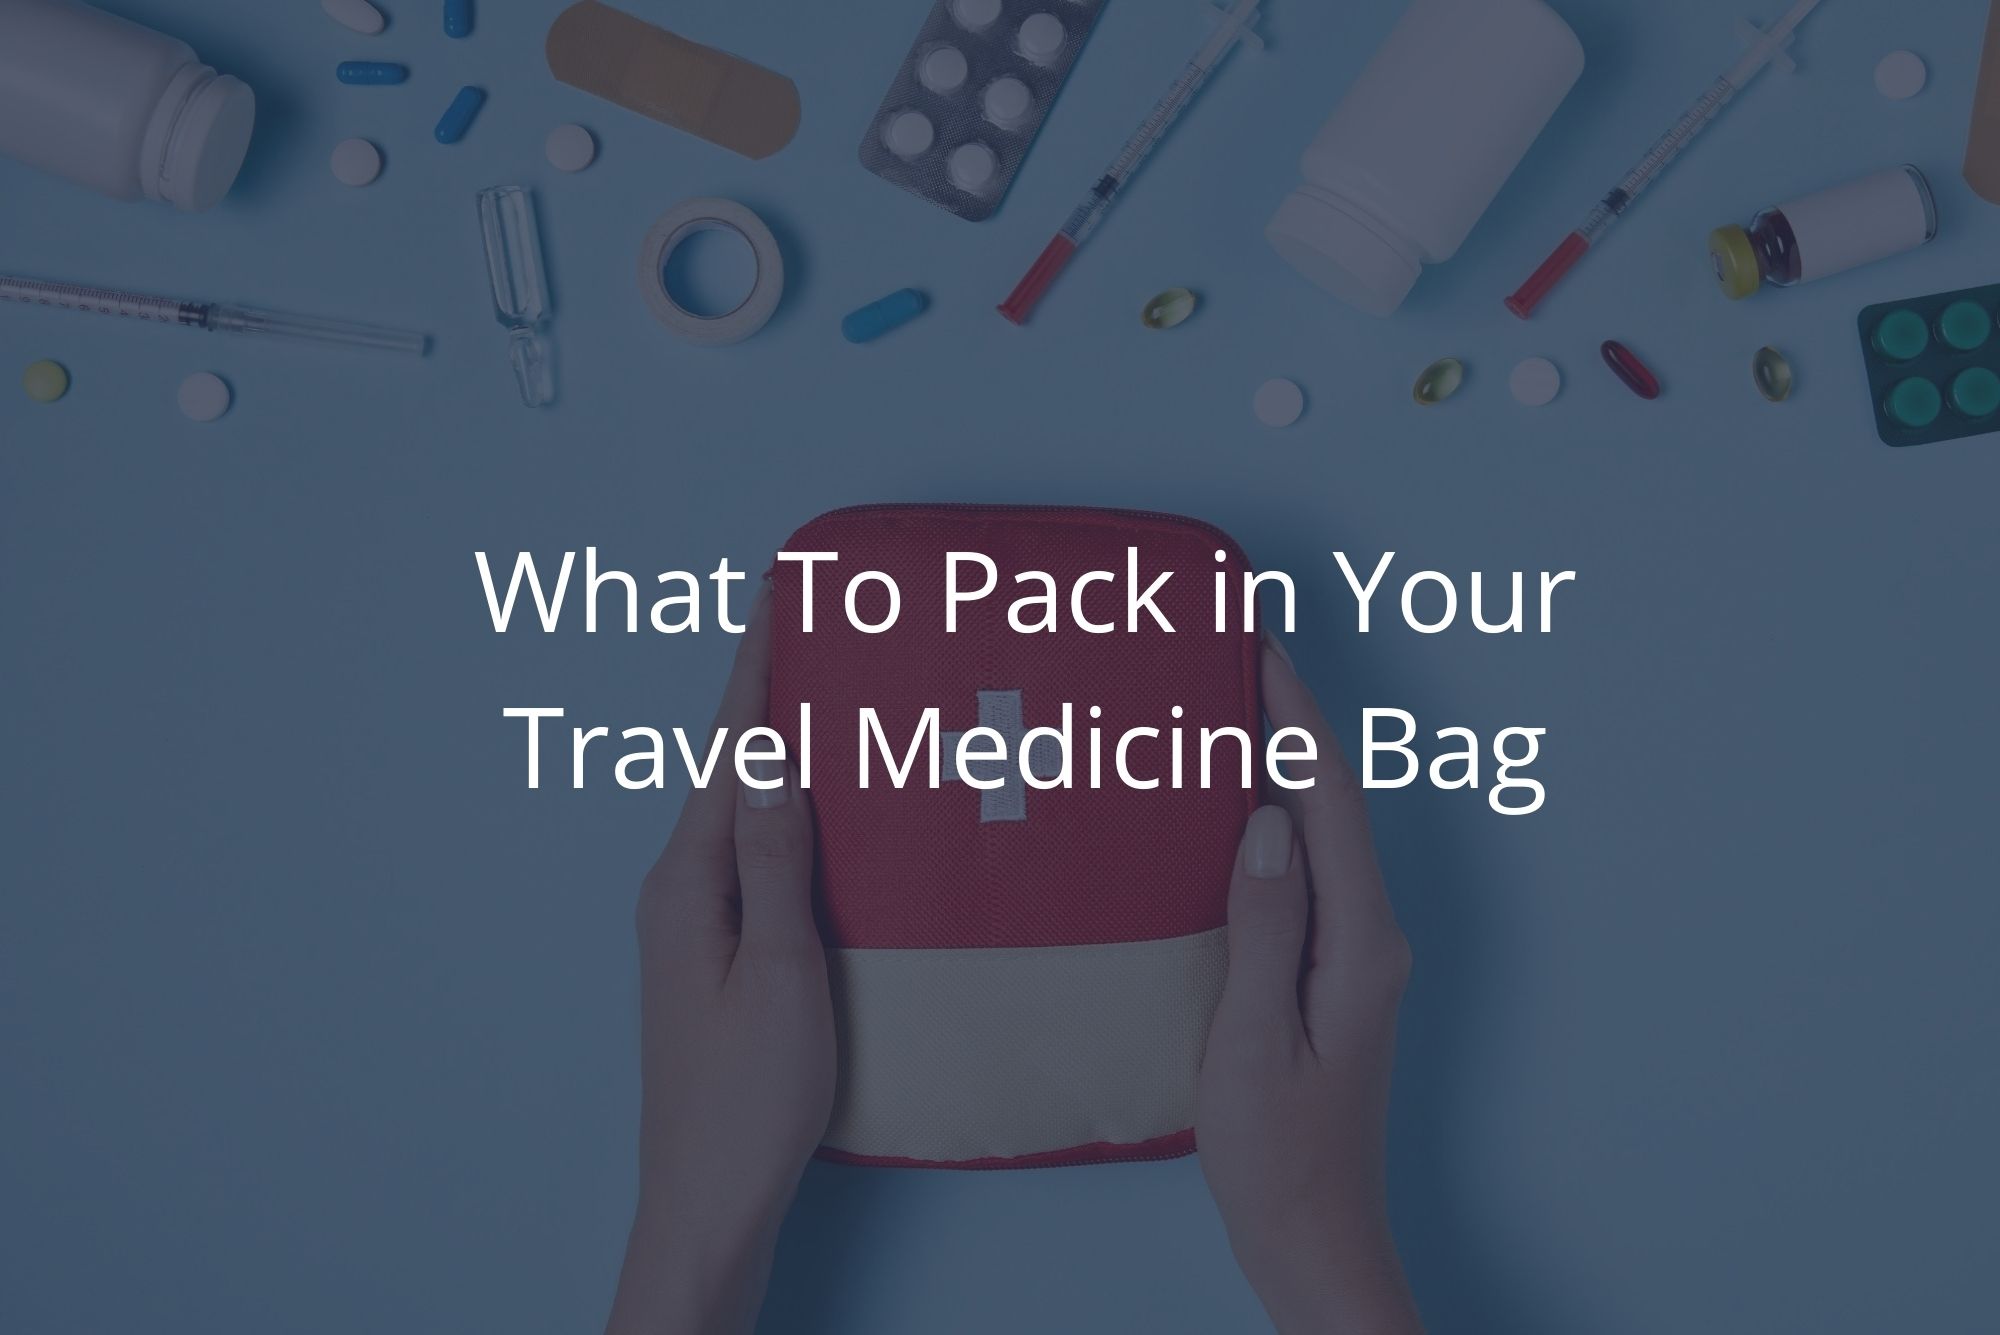 A woman holding a first aid kit figuring out what to pack in your travel medicine bag.